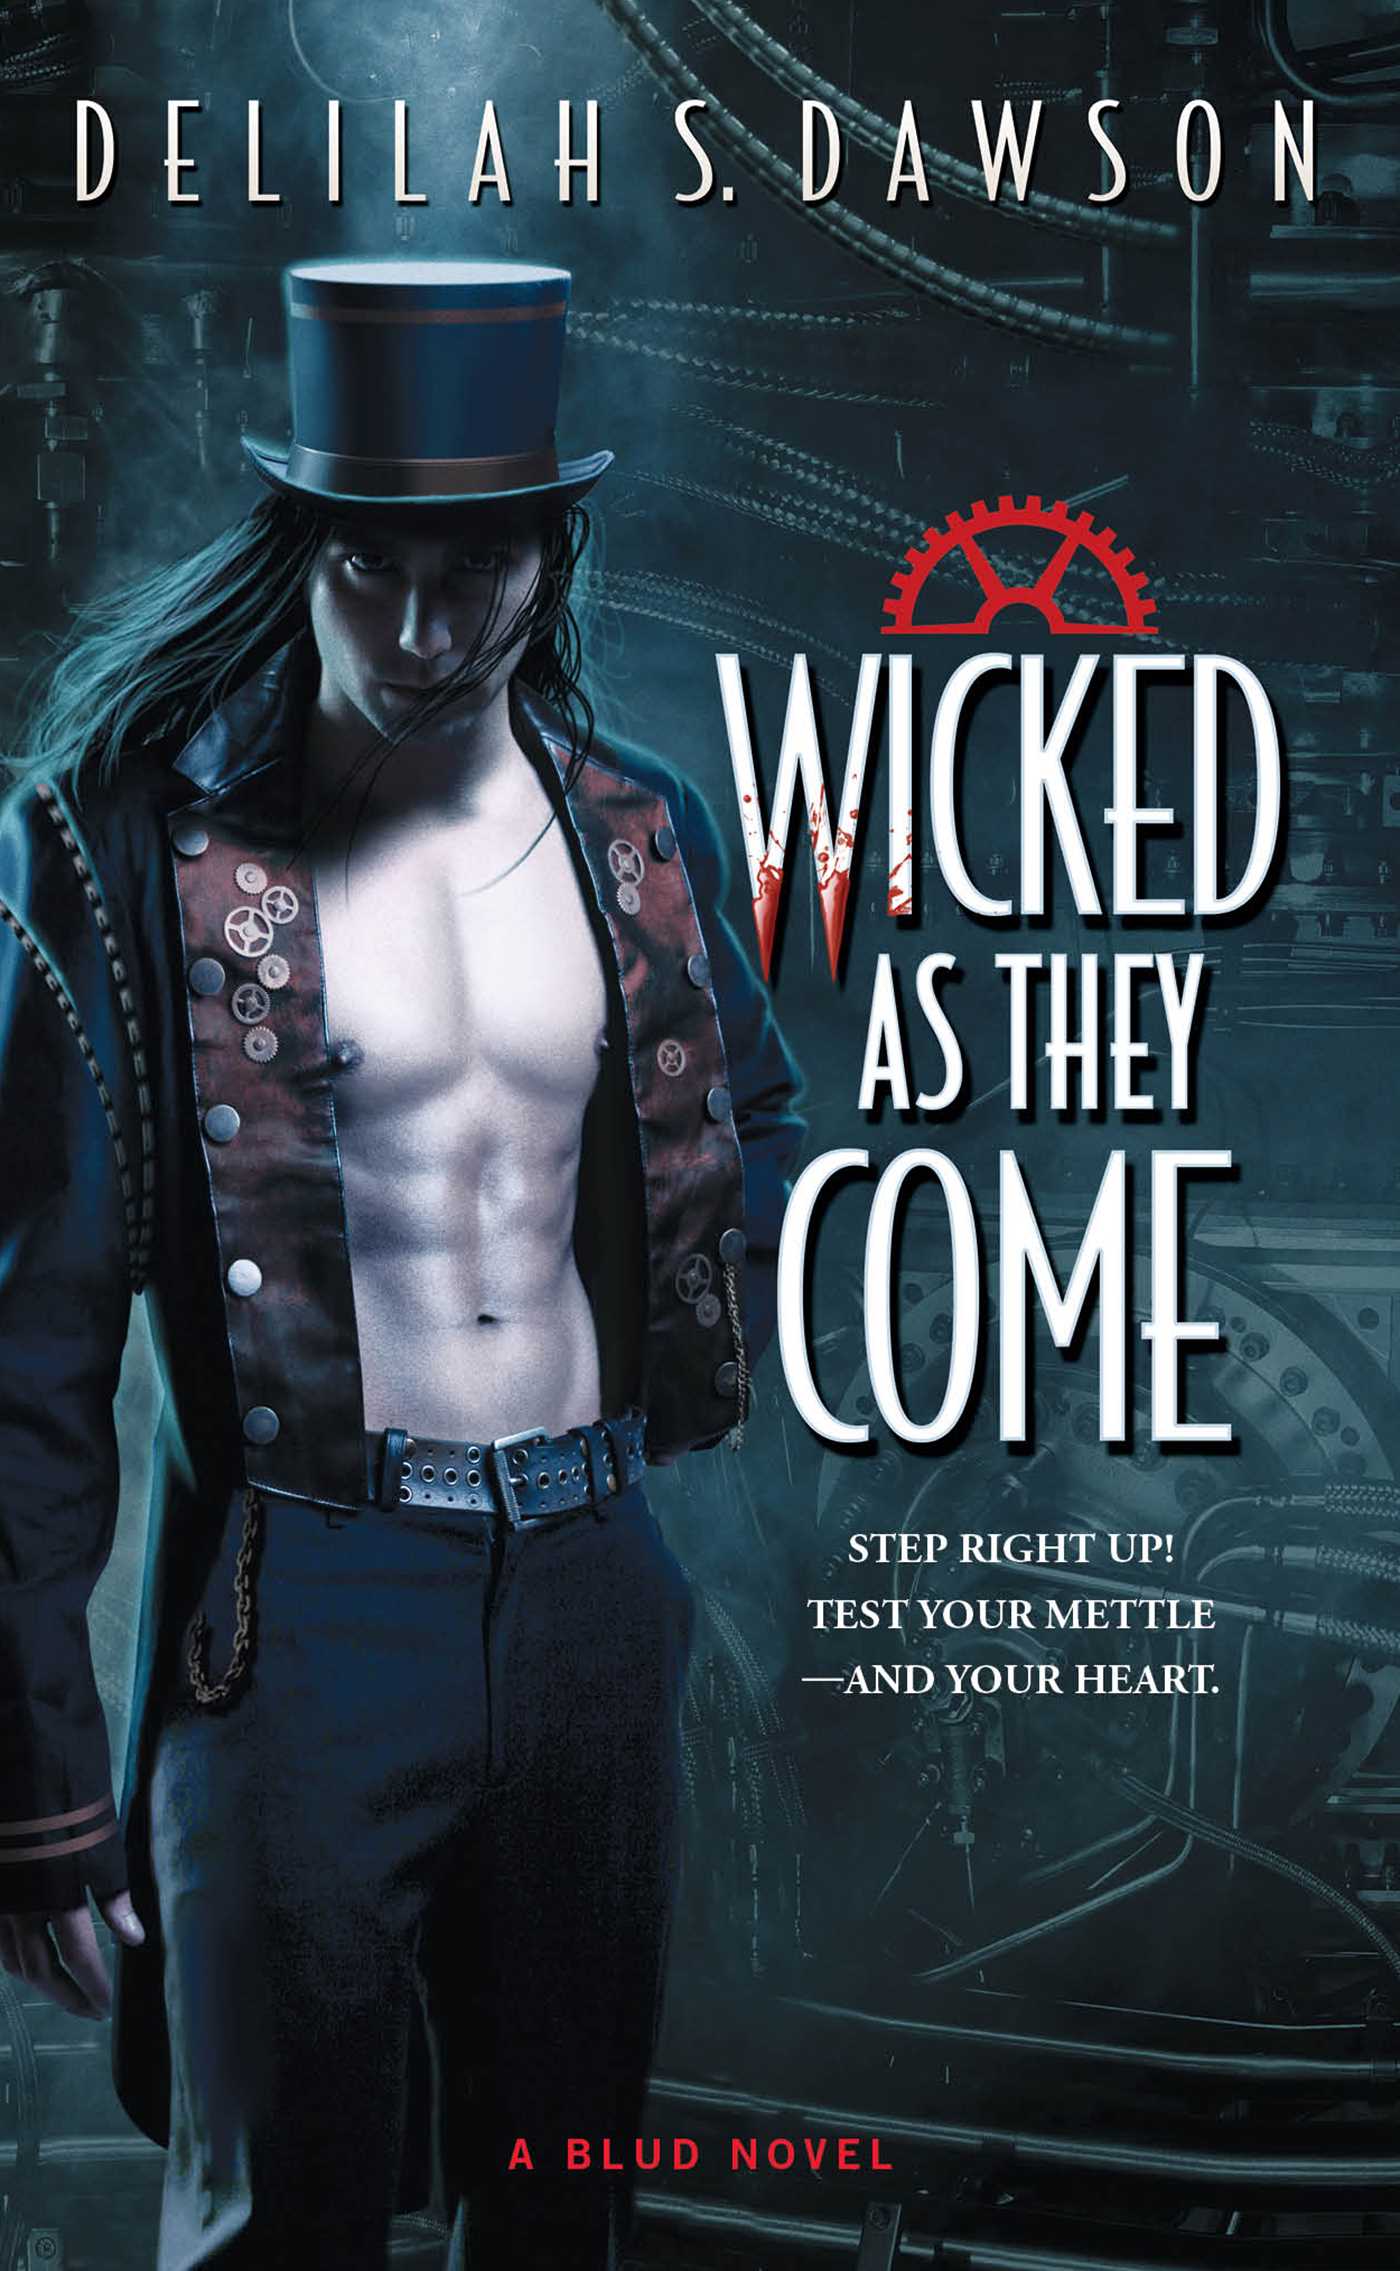 Wicked as They Come, by Delilah S. Dawson